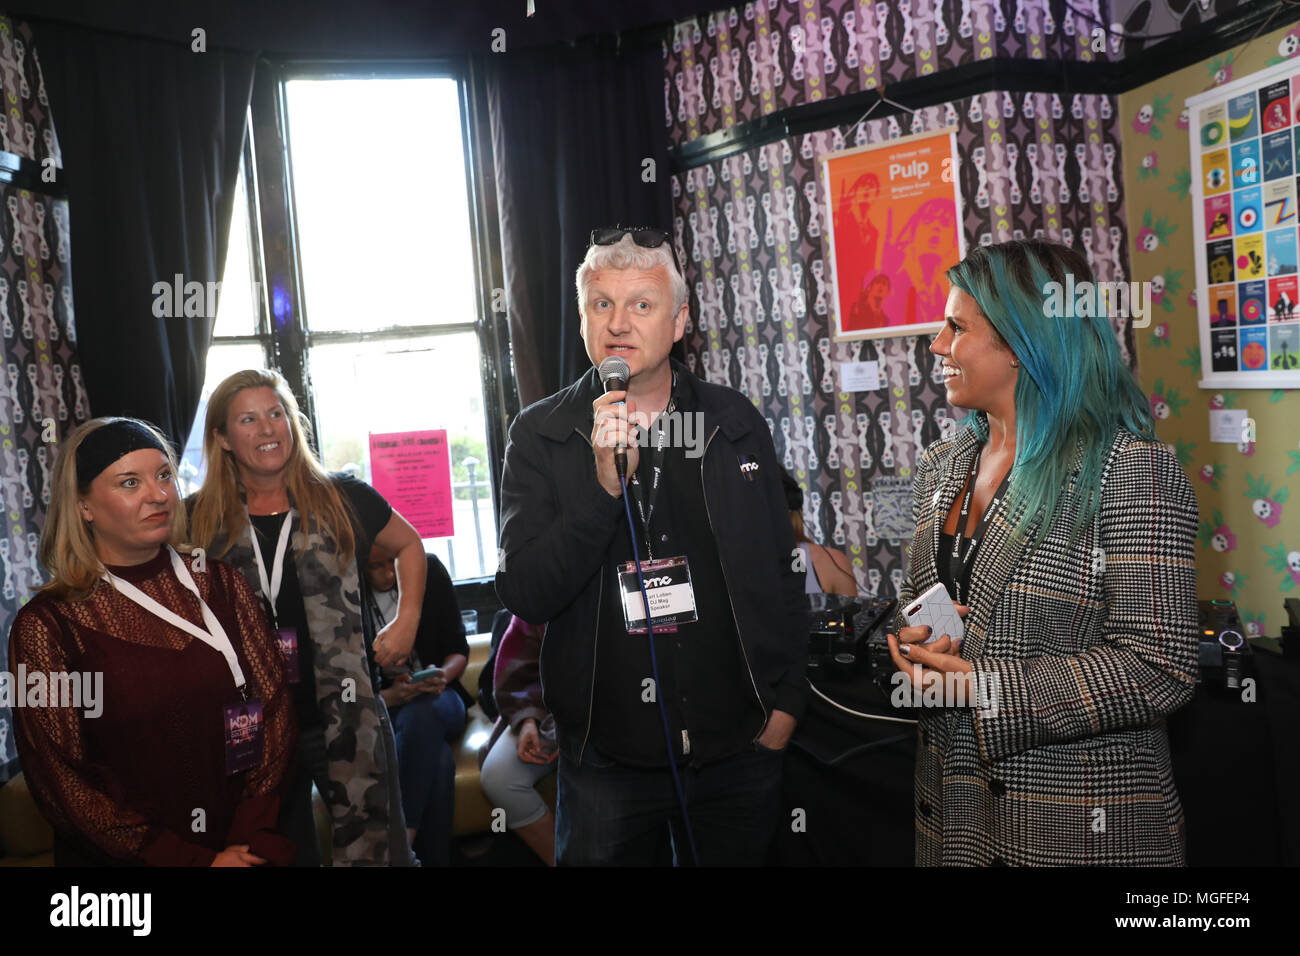 Brighton, UK, 26 April 2018. Women in Dance Music Collective launch party as part of the Brighton Music Conference 2018.  26th April 2018. The UK's foremost electronic music conference returns for its 5th year to Brighton Dome and various venues across the city from 25 - 28 April 2018.  Native Instruments presents Women in Dance Music Collective networking event in collaboration with She Said So, PRS Keychange Initiative & Women Produce Music & KOKORO GIN. Carl Loban, DJ Mag, Carly Wilford Stock Photo